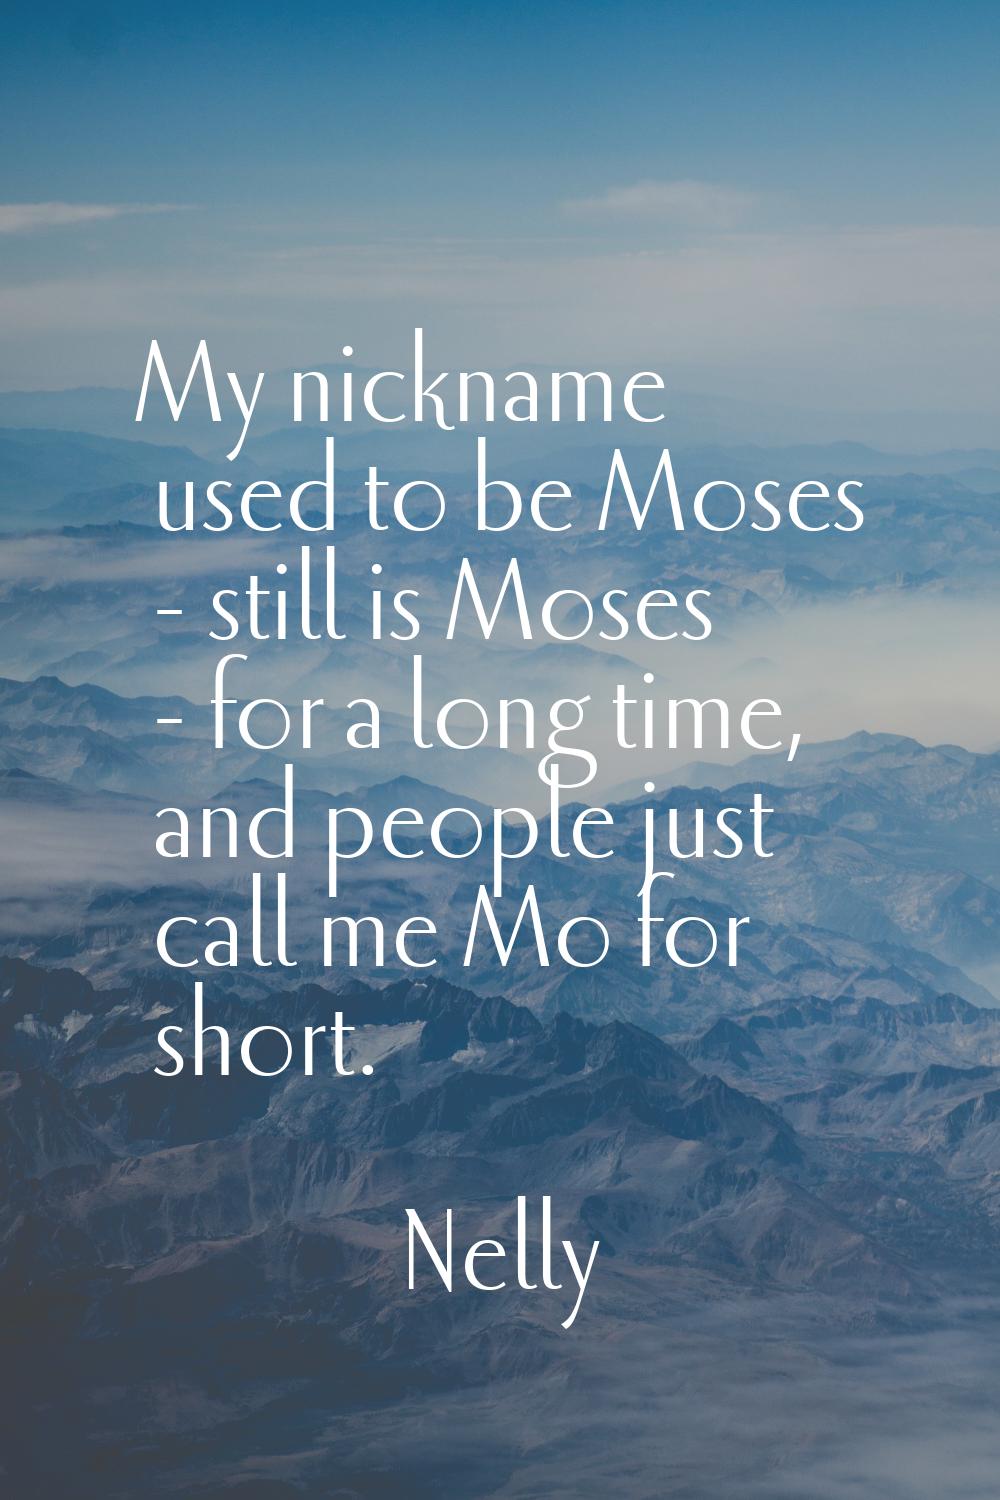 My nickname used to be Moses - still is Moses - for a long time, and people just call me Mo for sho